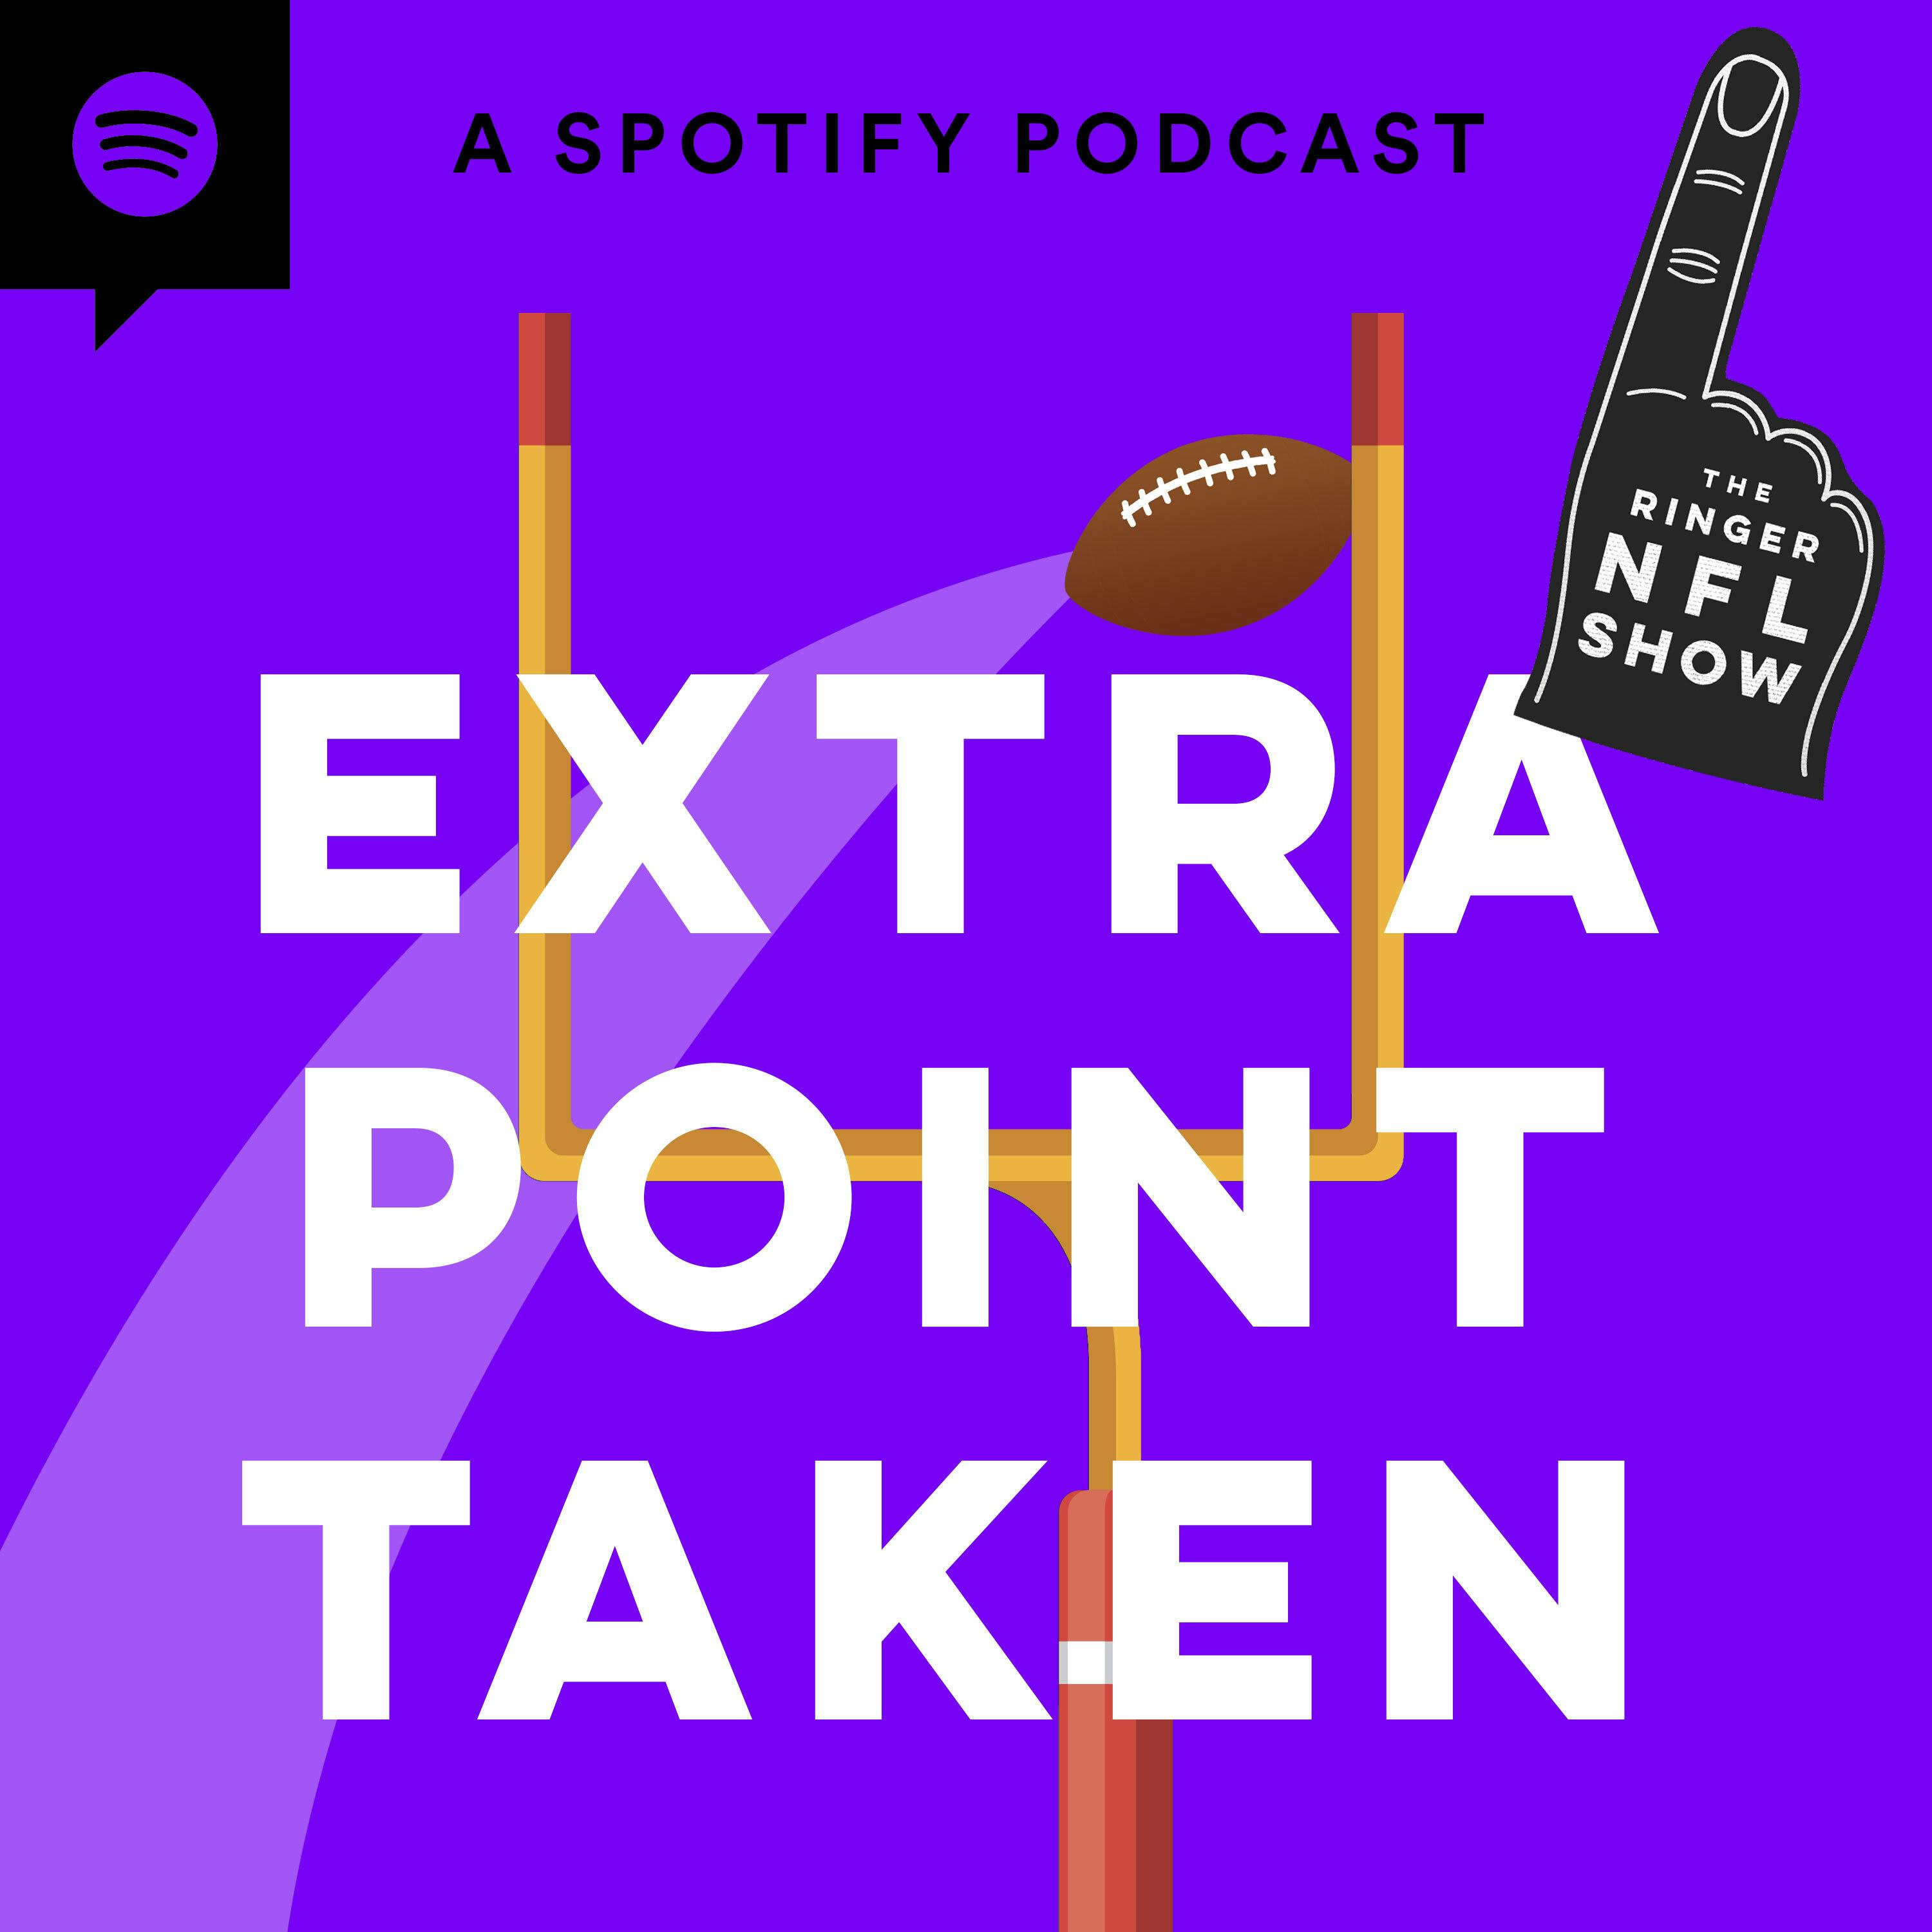 Drew Lock Gives the Seahawks a Shot, the Complete Buffalo Bills, and More Big Takeaways from Week 15 | Extra Point Taken